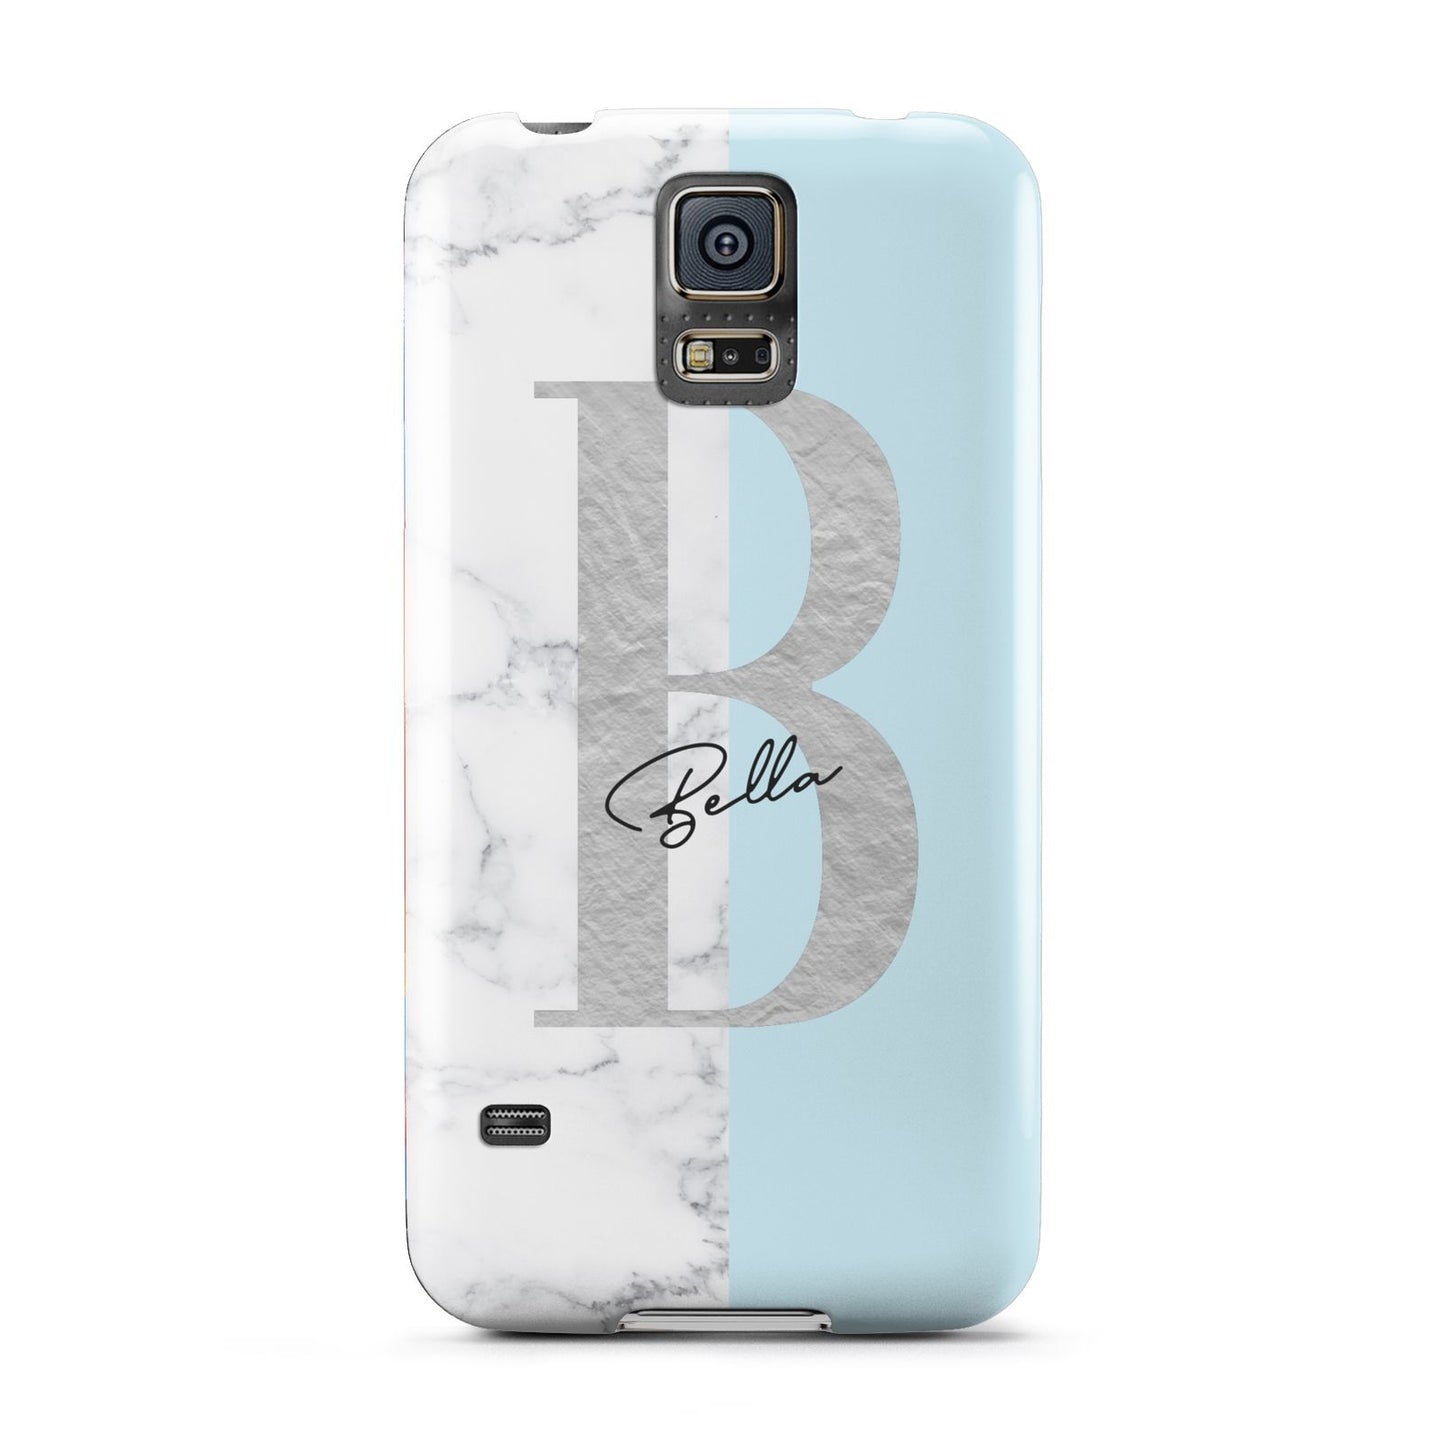 Personalised Chrome Marble Samsung Galaxy S5 Case